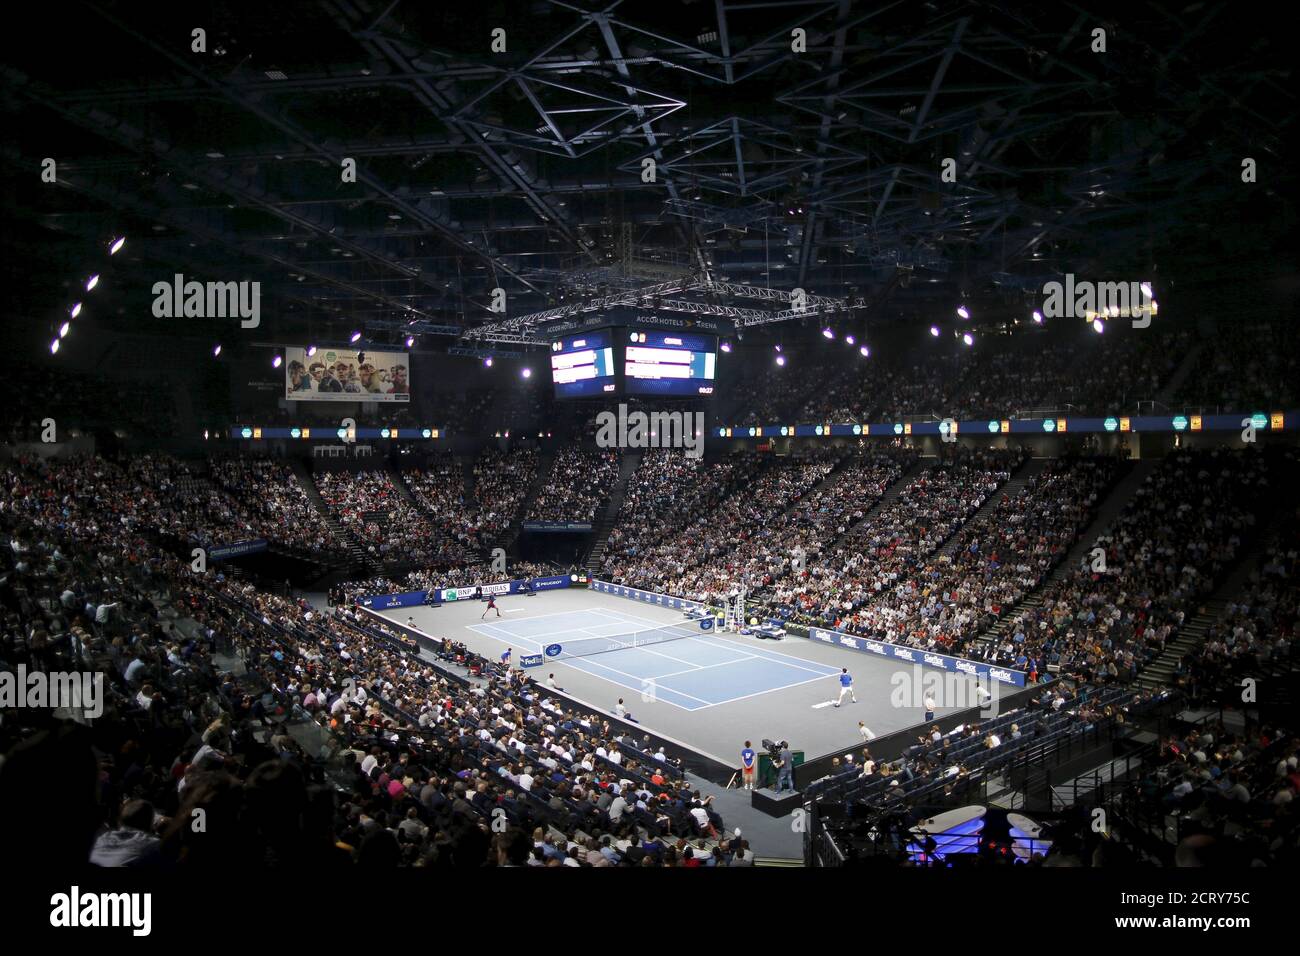 General inside view of the AccorHotels Arena during the Paris Masters tennis  tournament, France, November 6, 2015. The AccorHotels Arena (formerly known  as Bercy Arena or Palais Omnisports de Paris-Bercy POPB) is